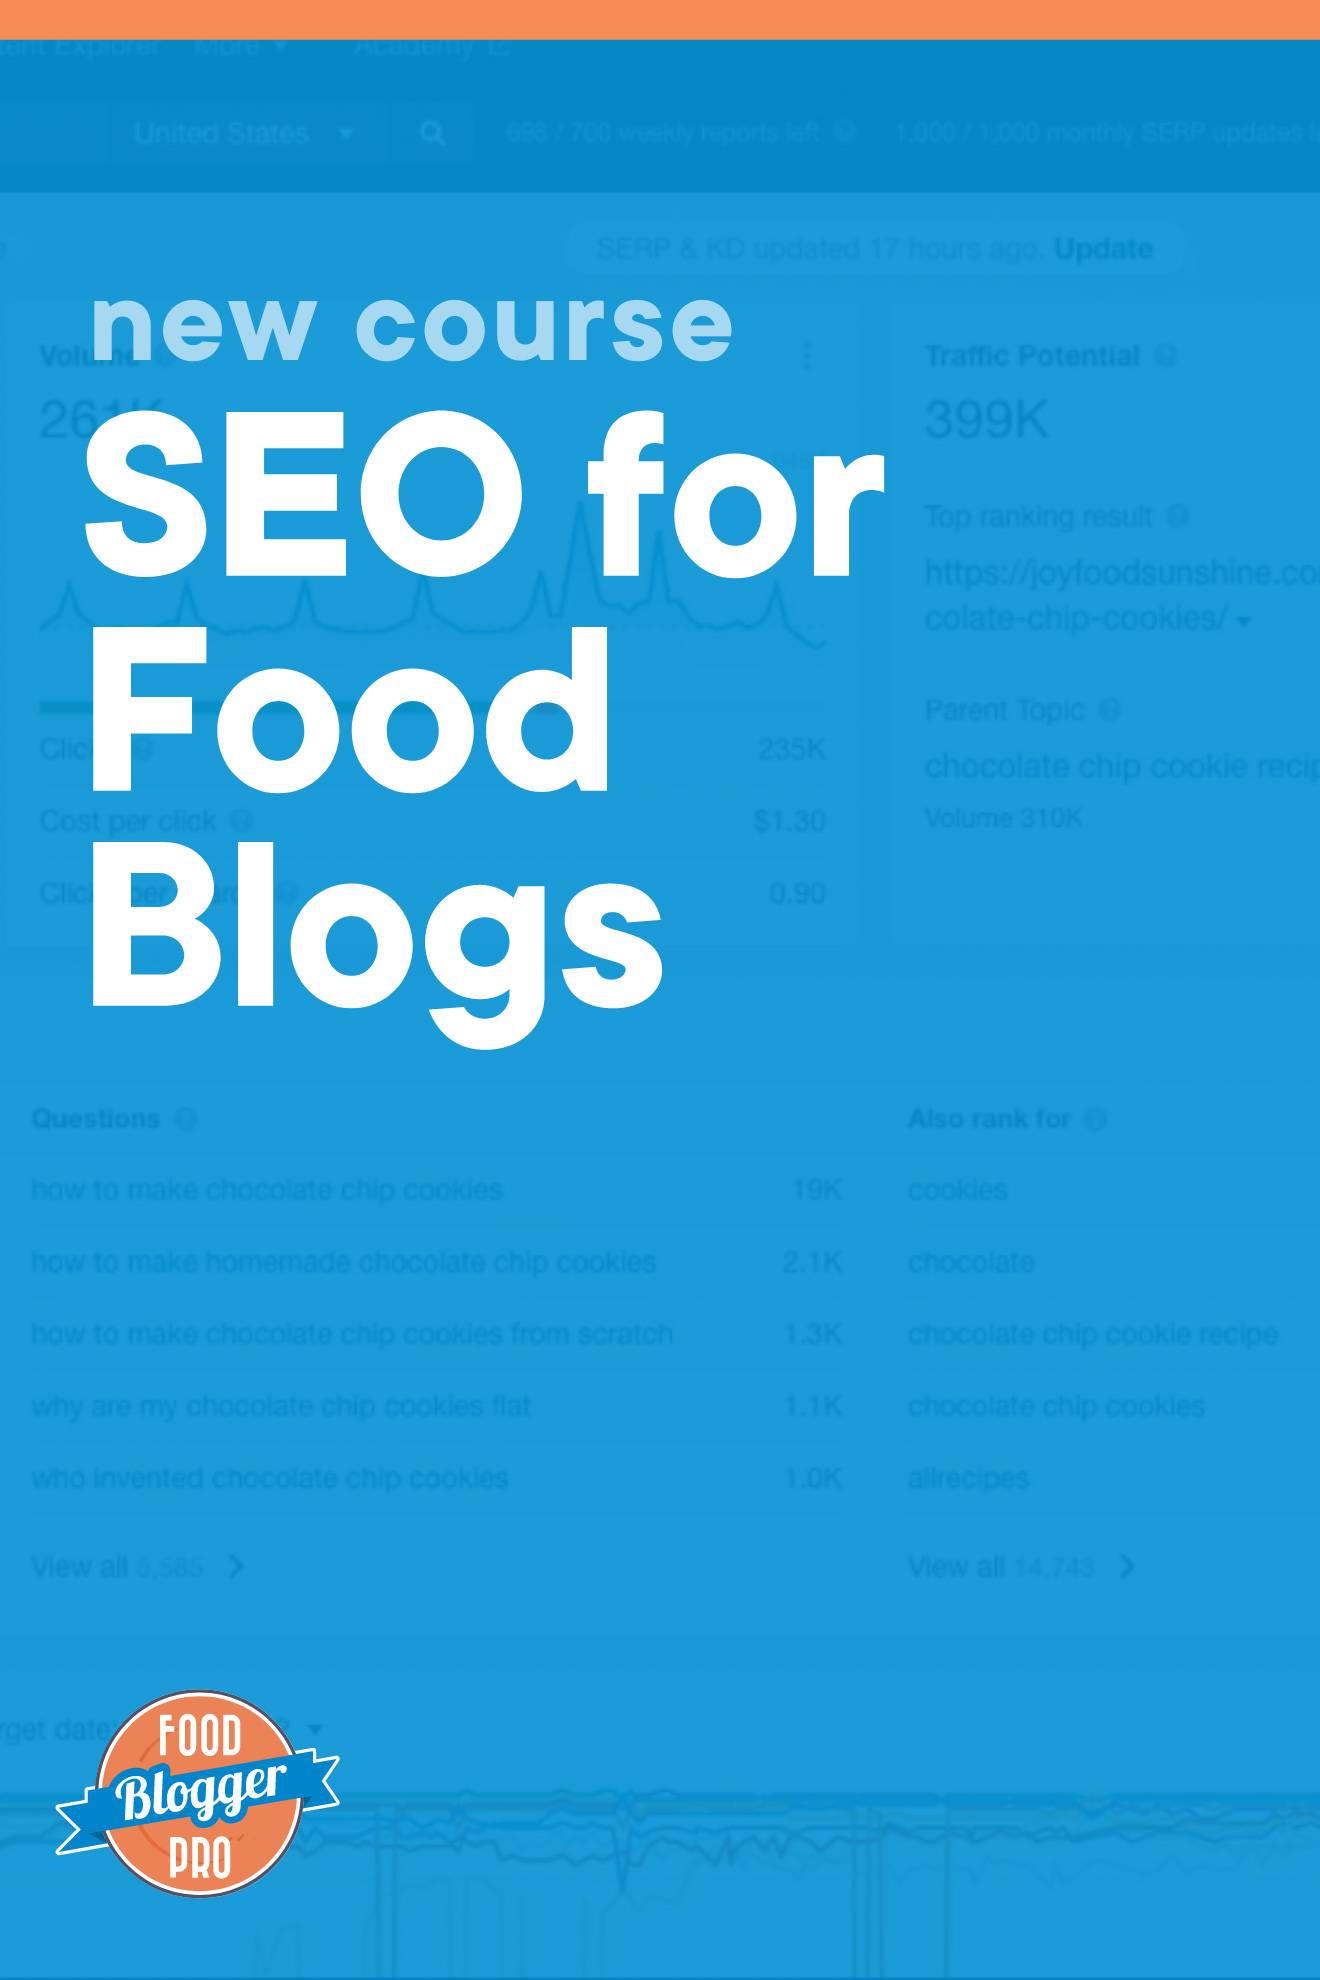 Blue image of Ahrefs keyword search with the text "New Course: SEO for Food Blogs" and the food blogger pro logo